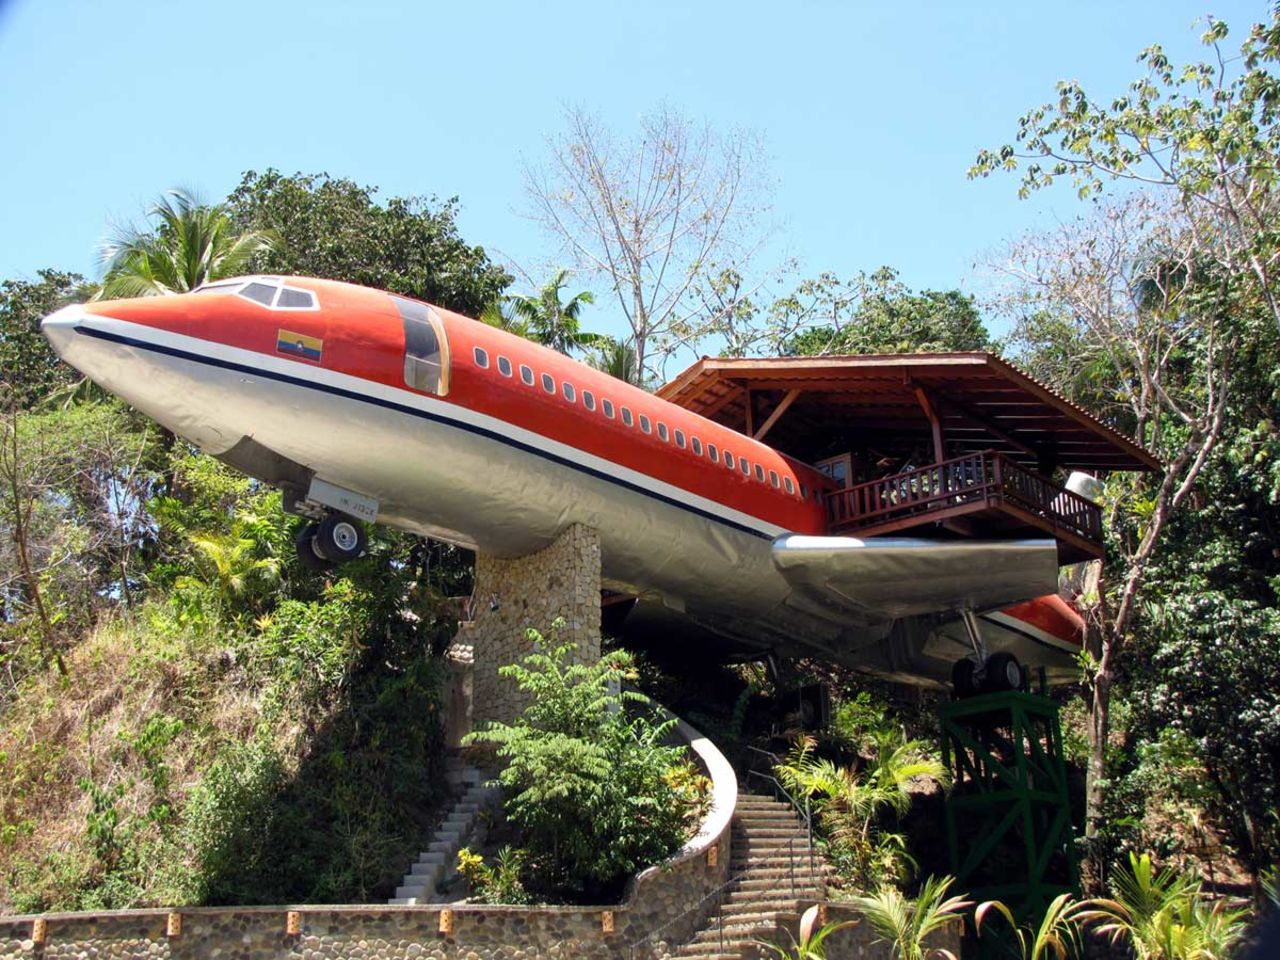 This suite at the Hotel Costa Verde on the Costa Rican coast was once a Boeing 727. For $250 a night ($500 during peak season) you can sleep next to tropical beaches in an airplane that can no longer fly. 